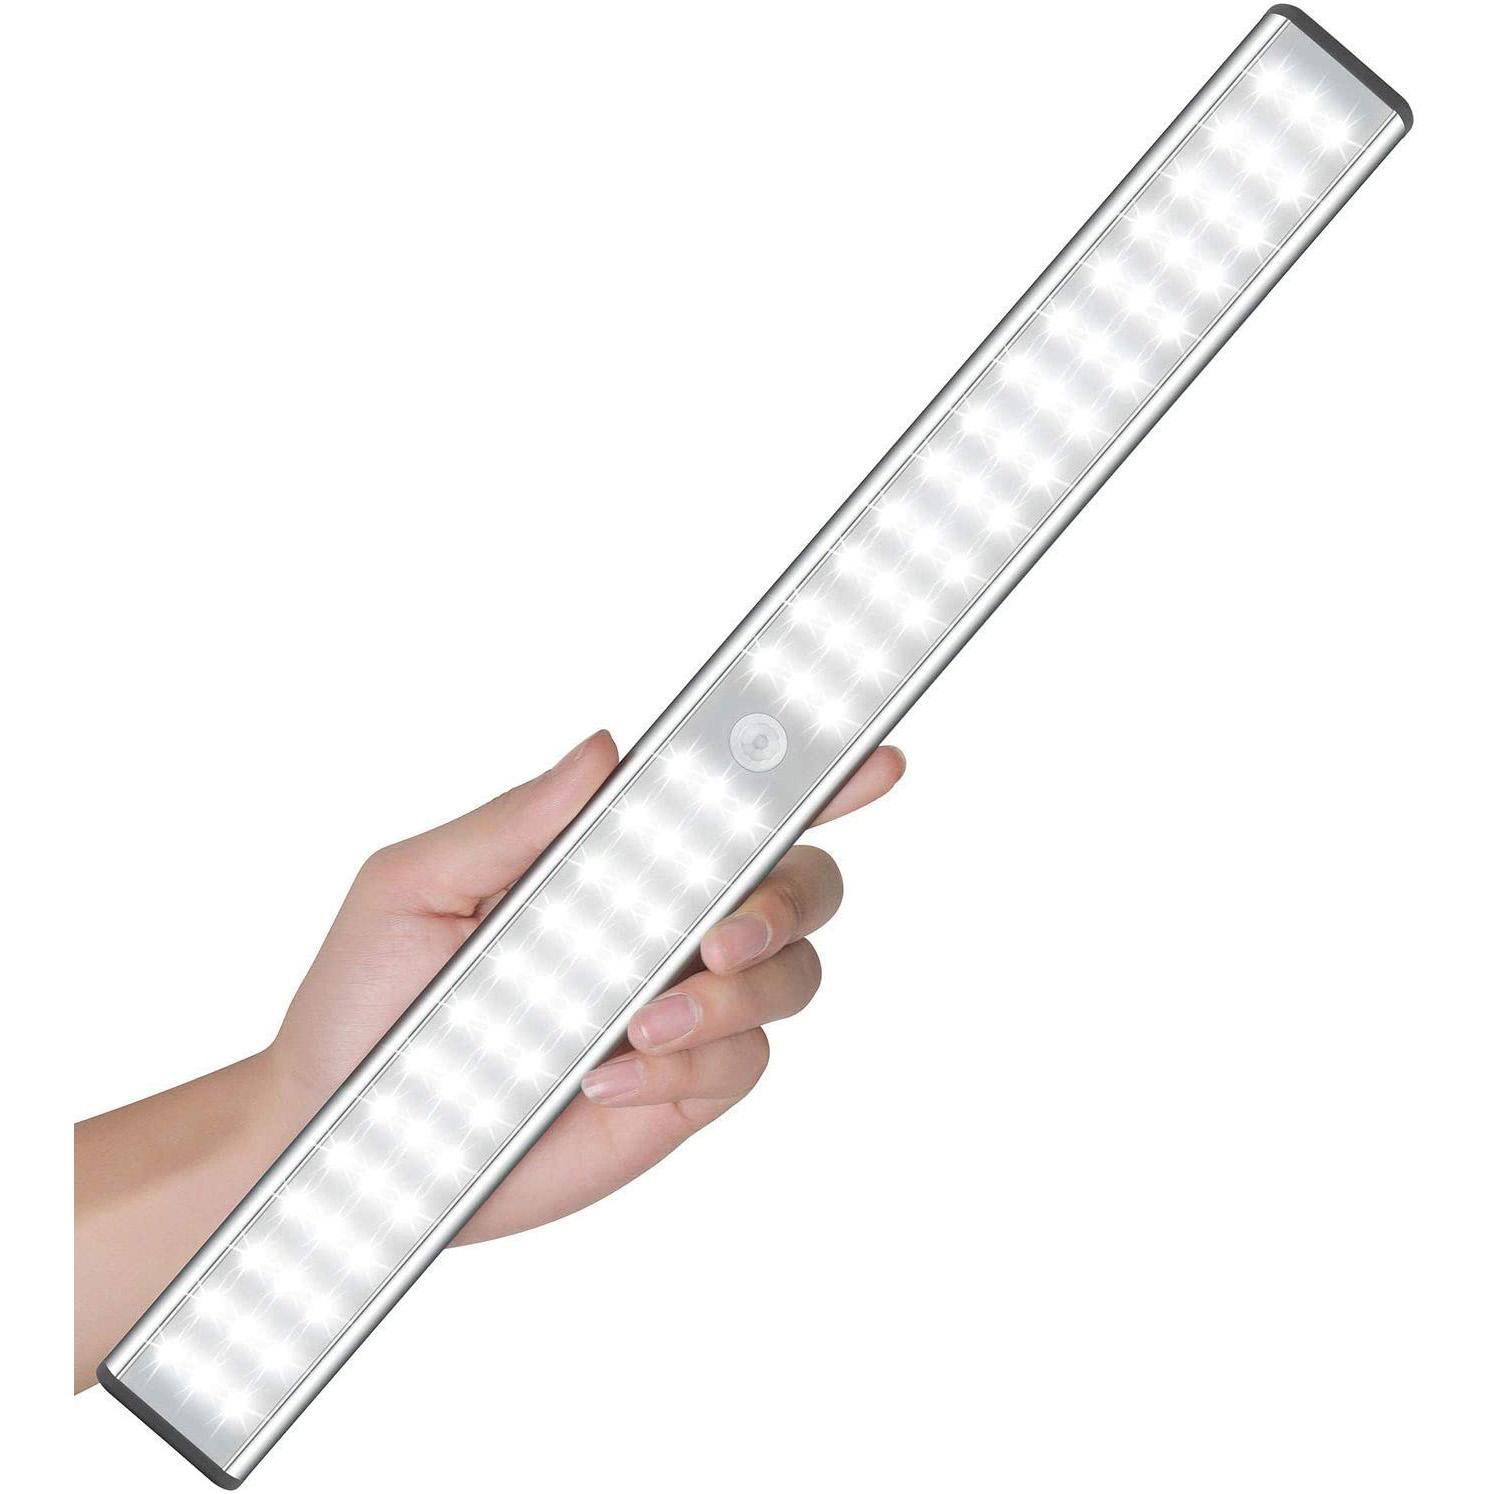 Moston Super Bright Rechargeable Closet Light 78LED for $15.59 Shipped